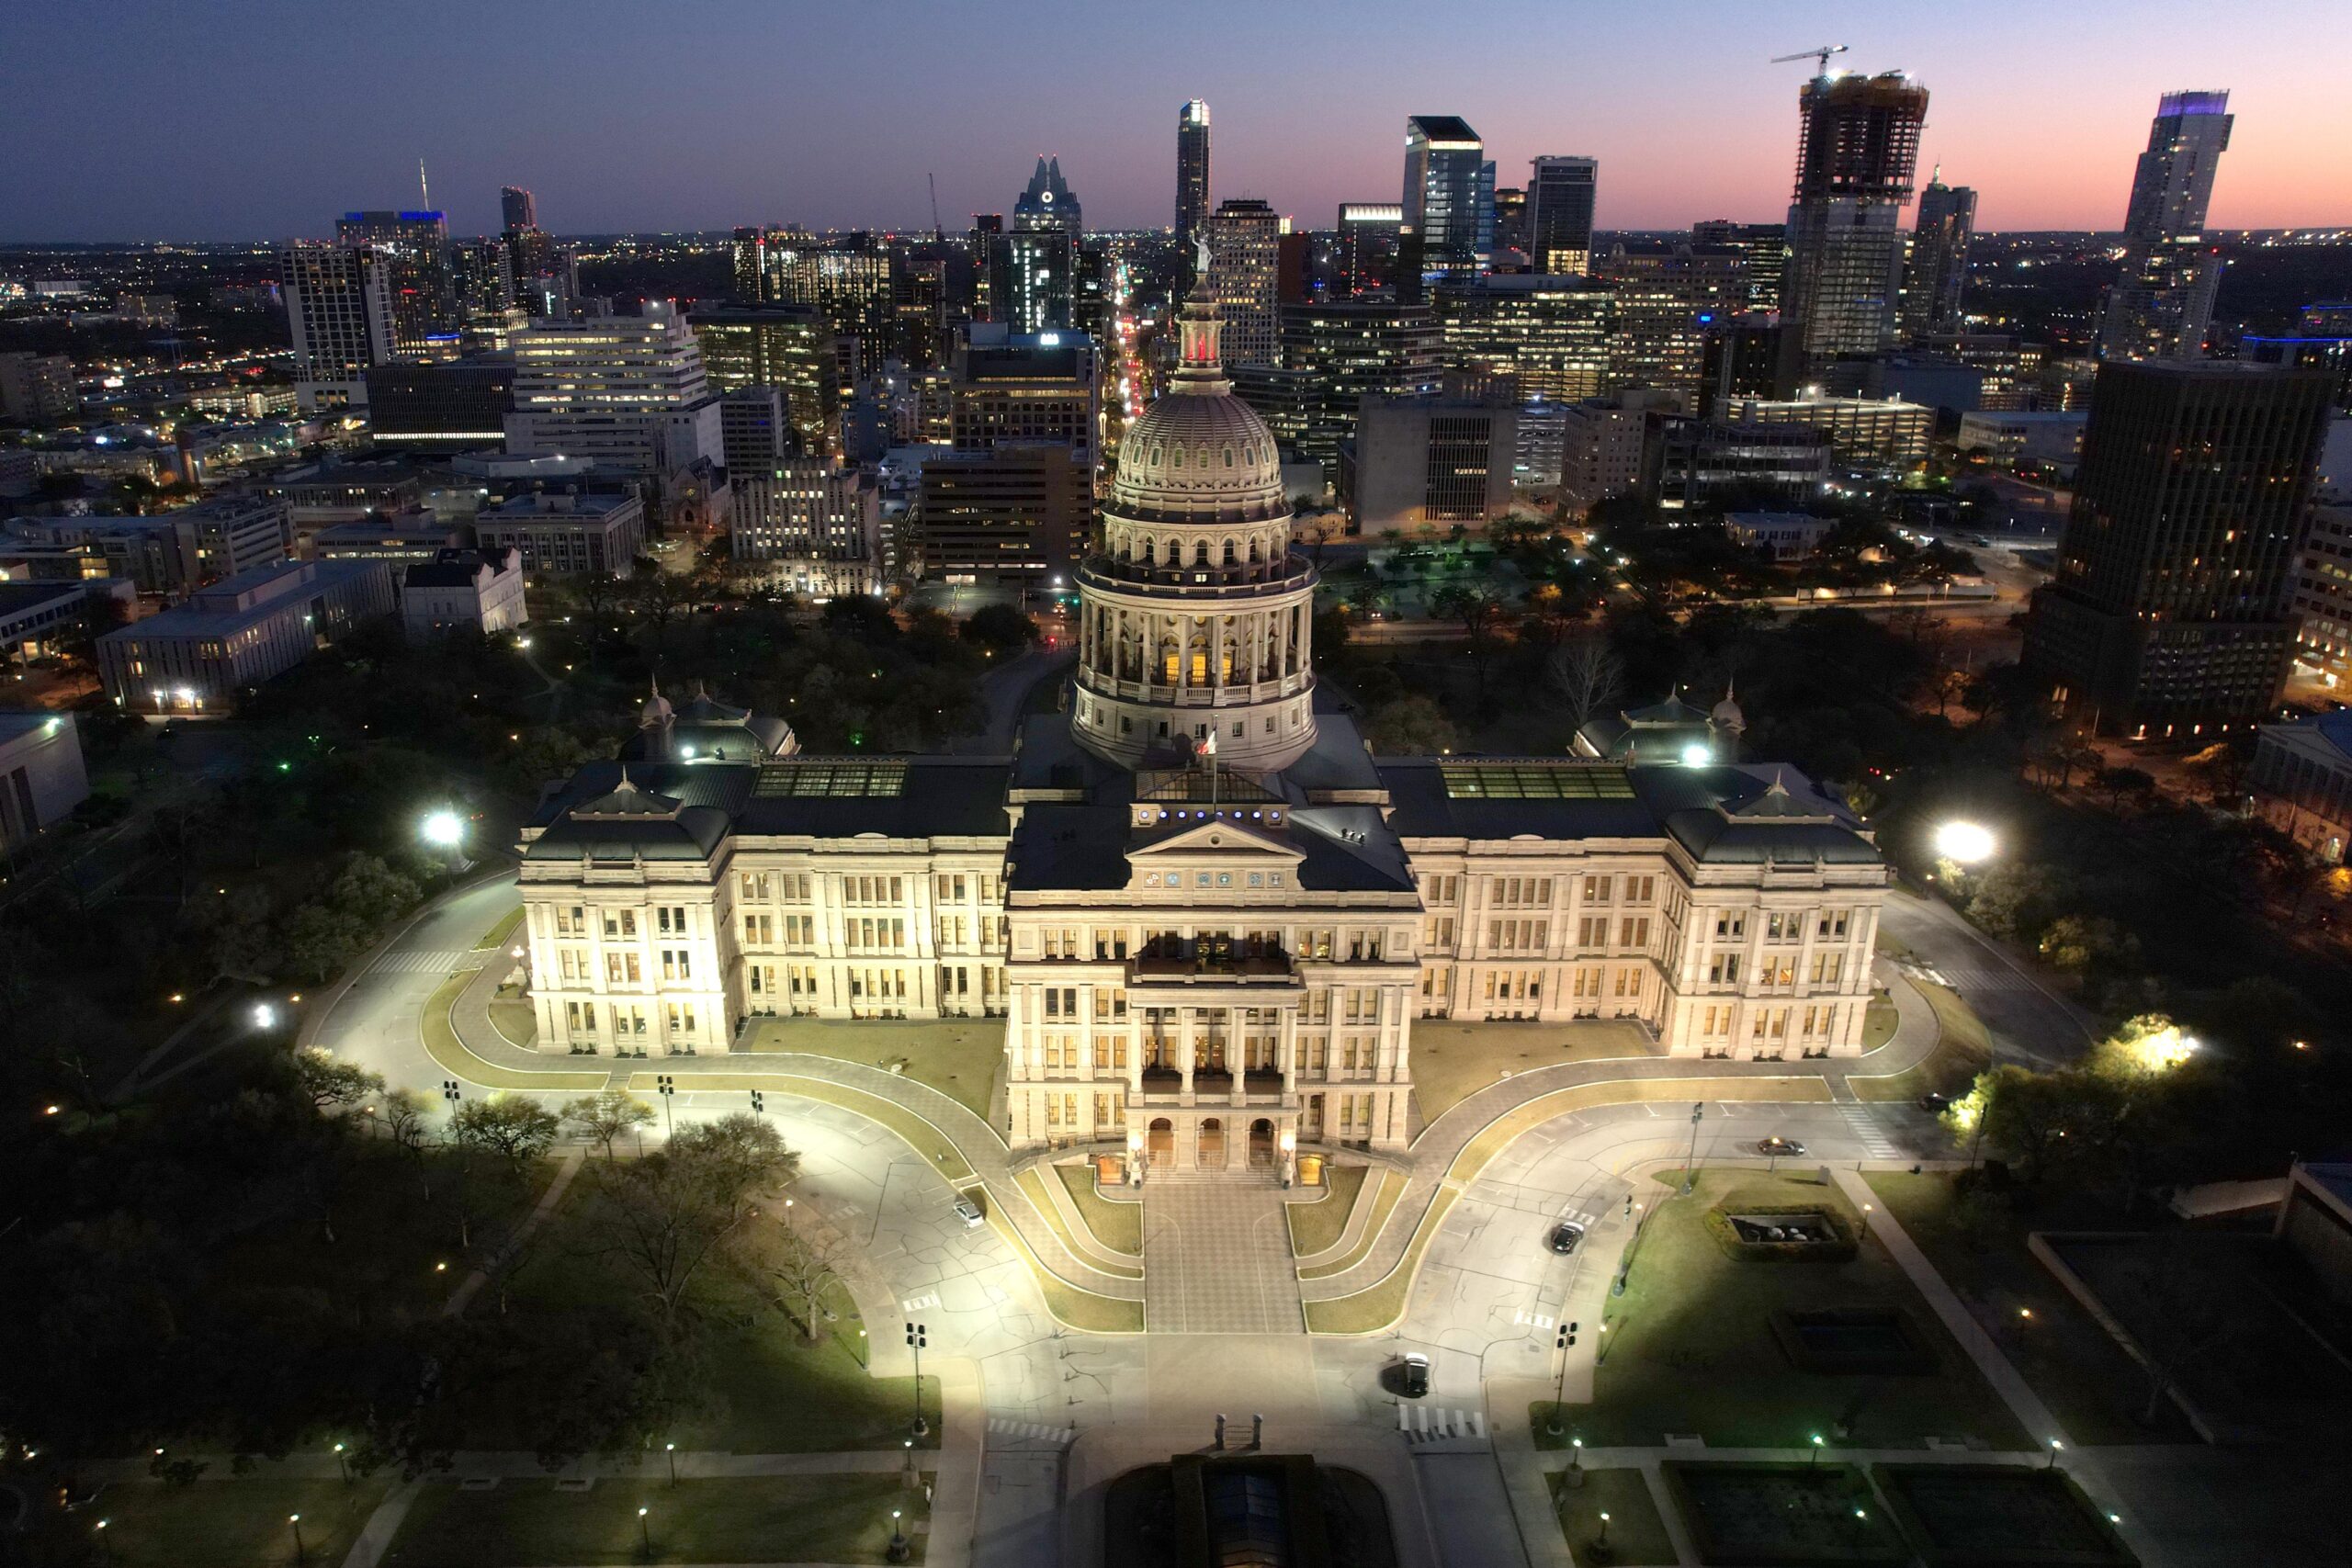 The Texas Capitol building seen from overhead, lit up at night.